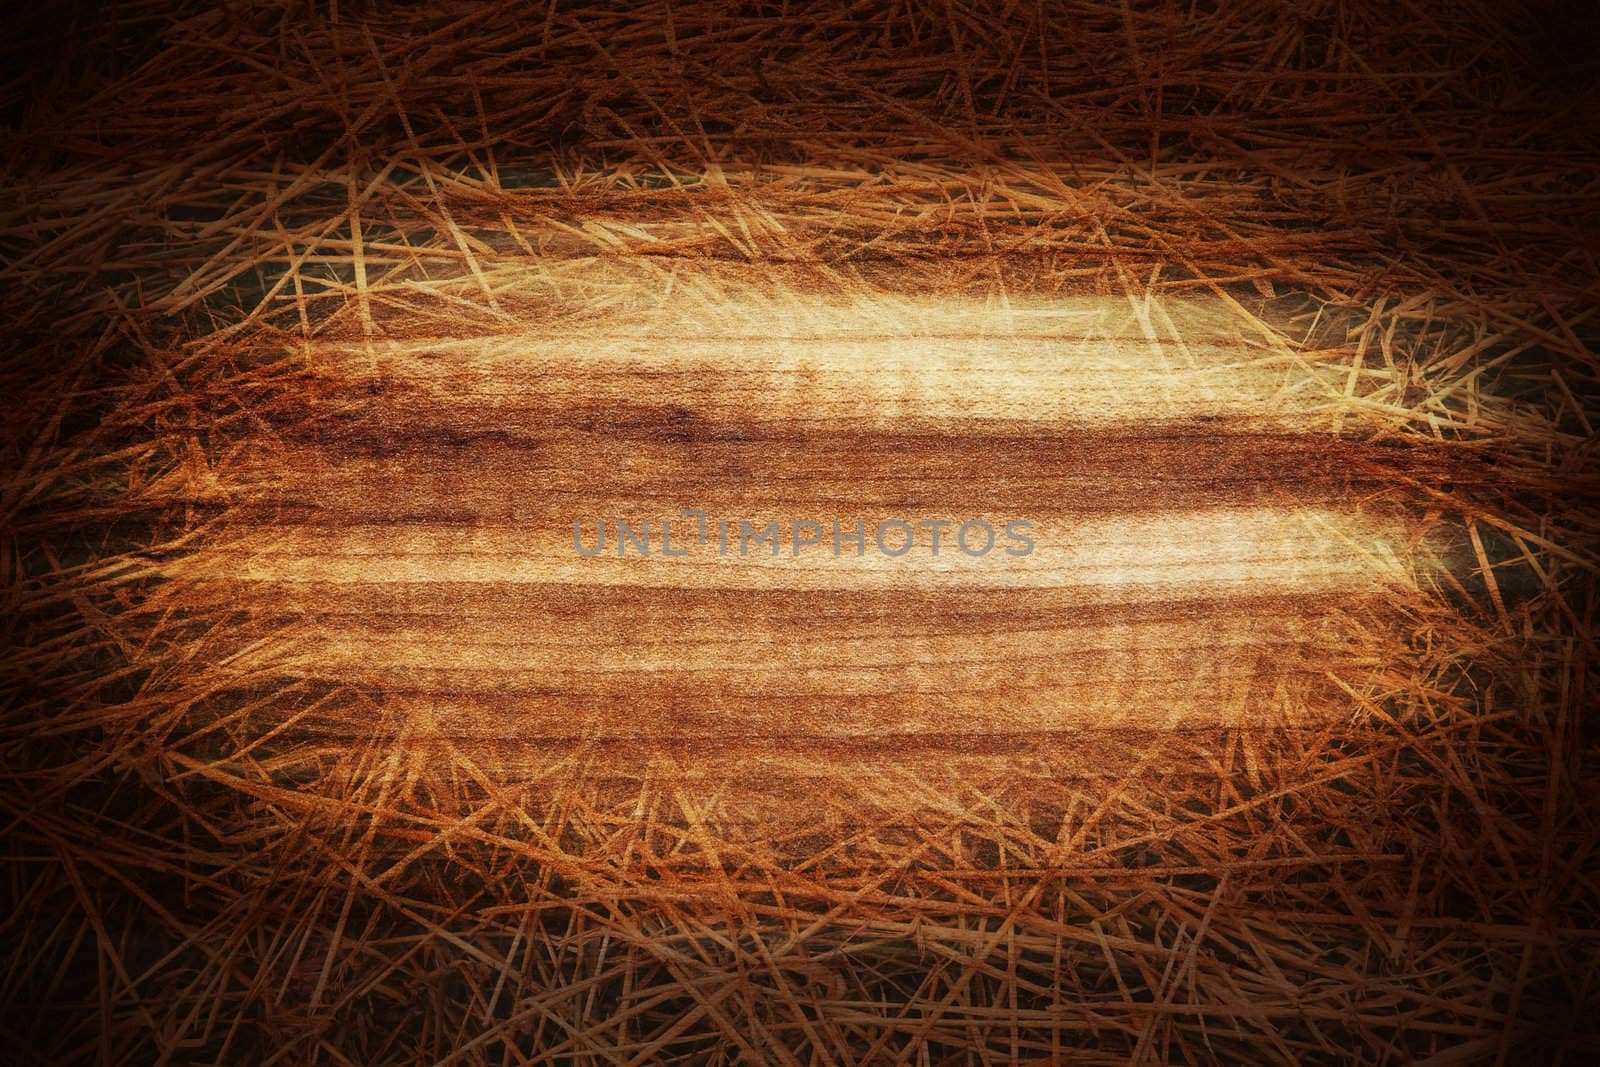 Funky grungy noisy texture background made from hay and wood planks with visible grain.